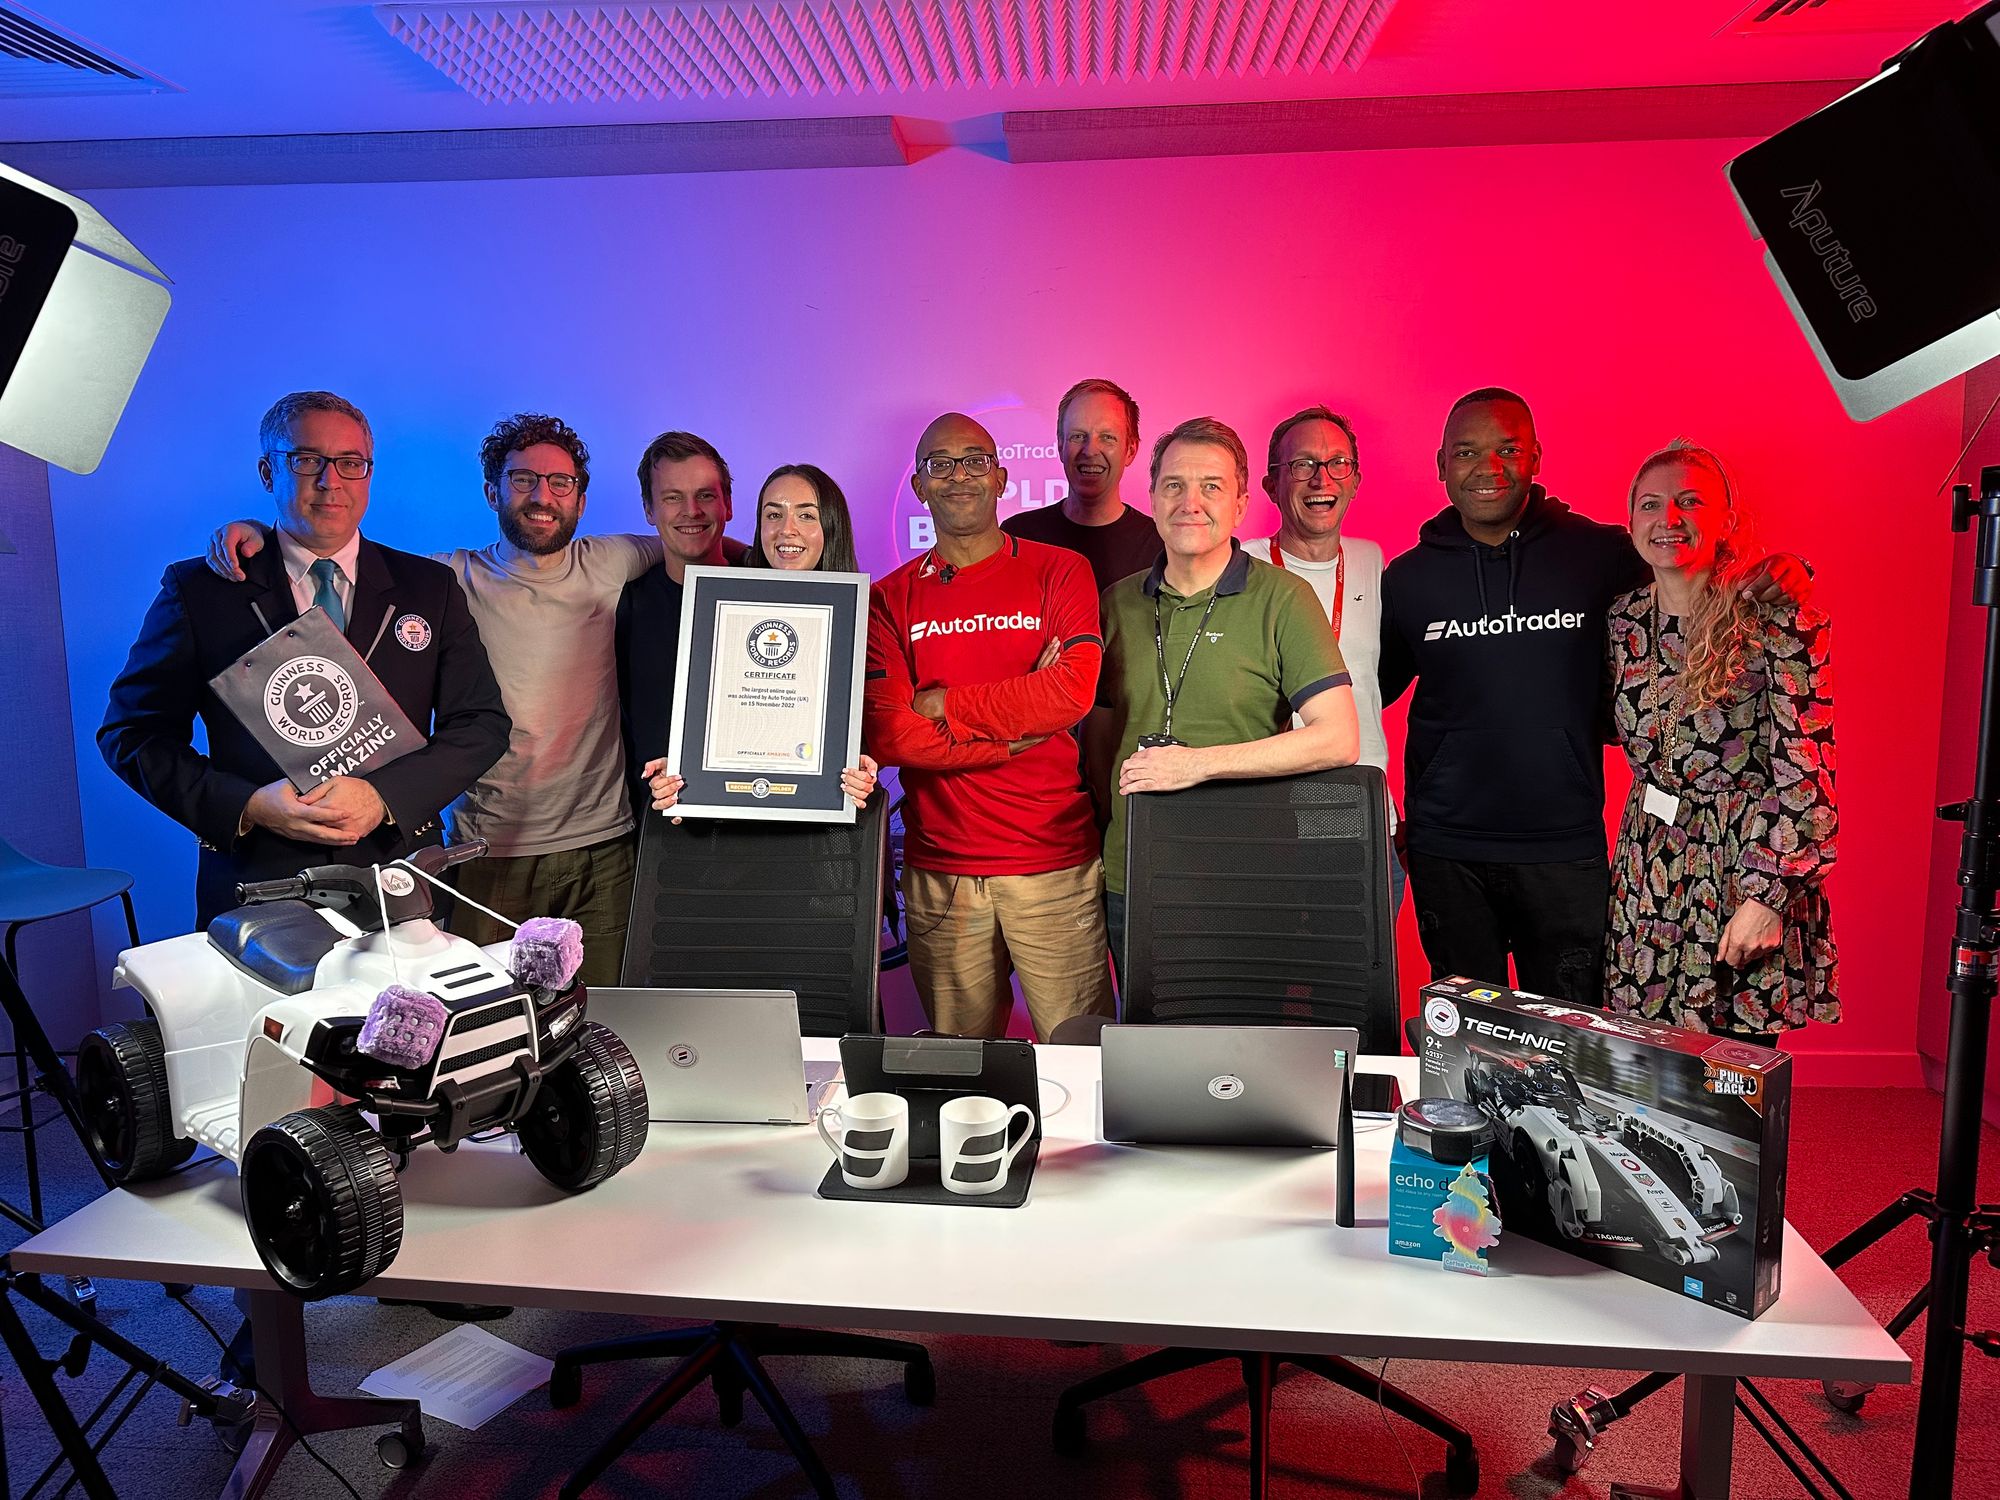 Auto Trader and Piing receive world record certificate